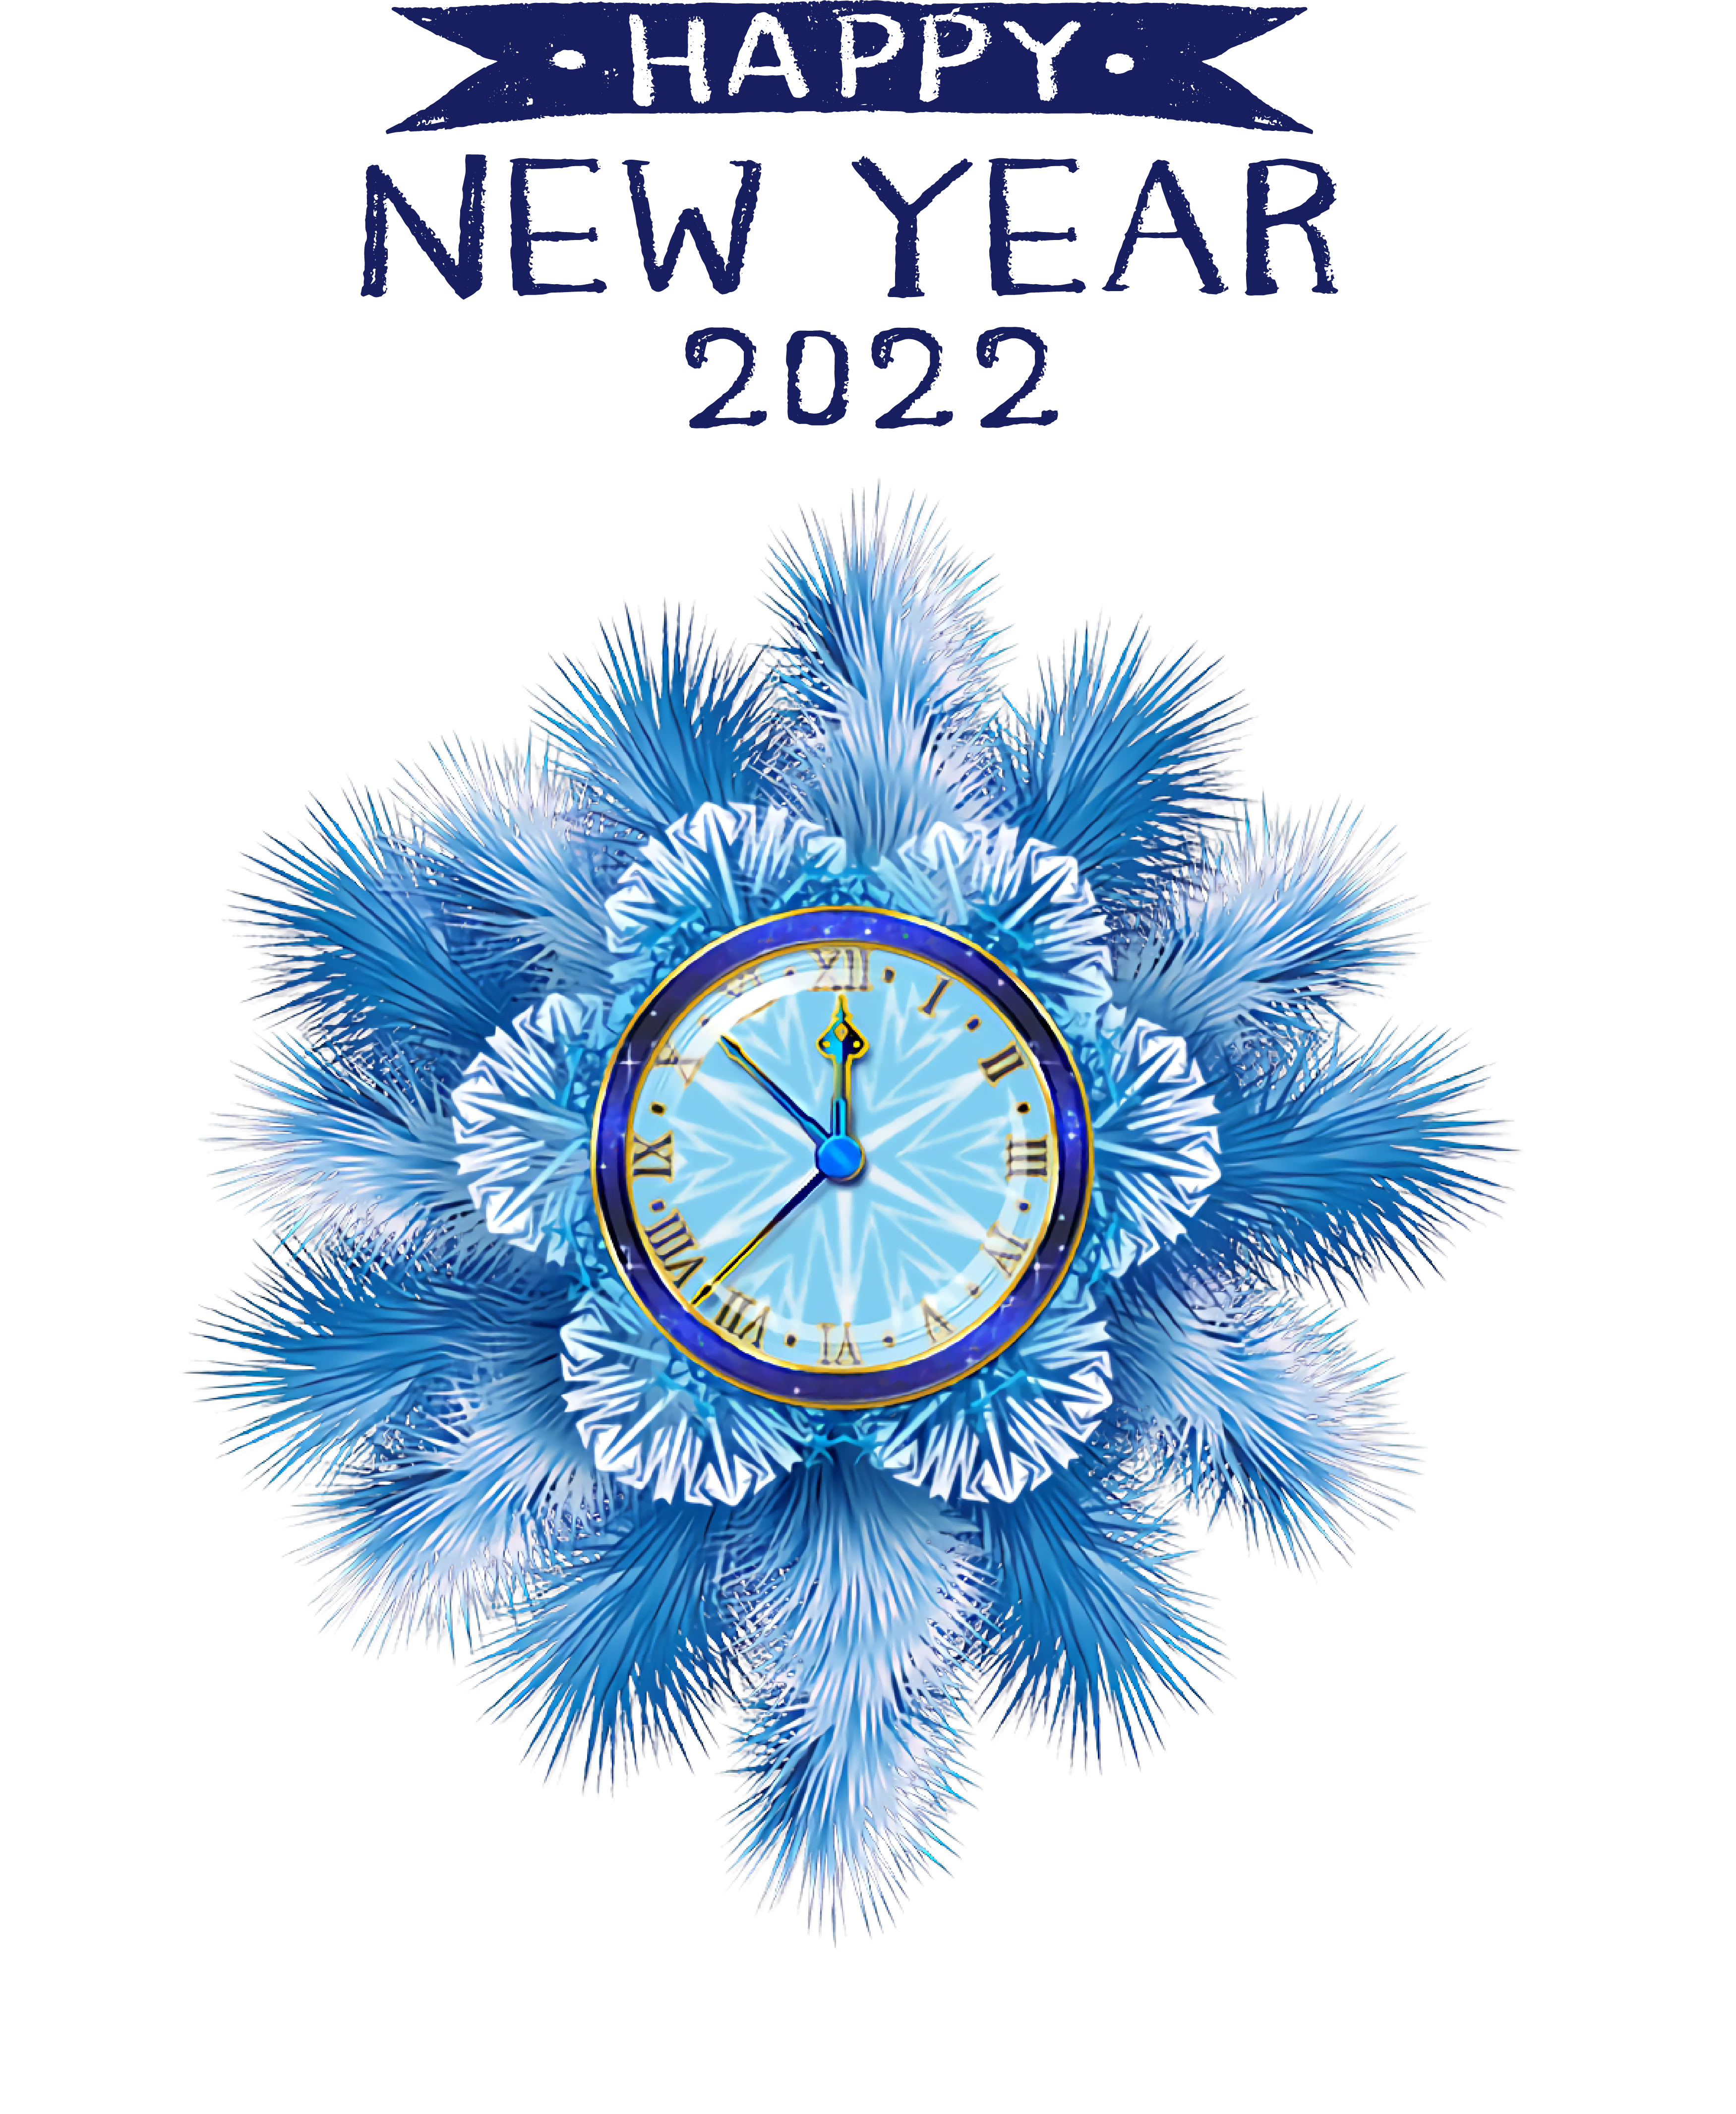 Happy new year 2022 png